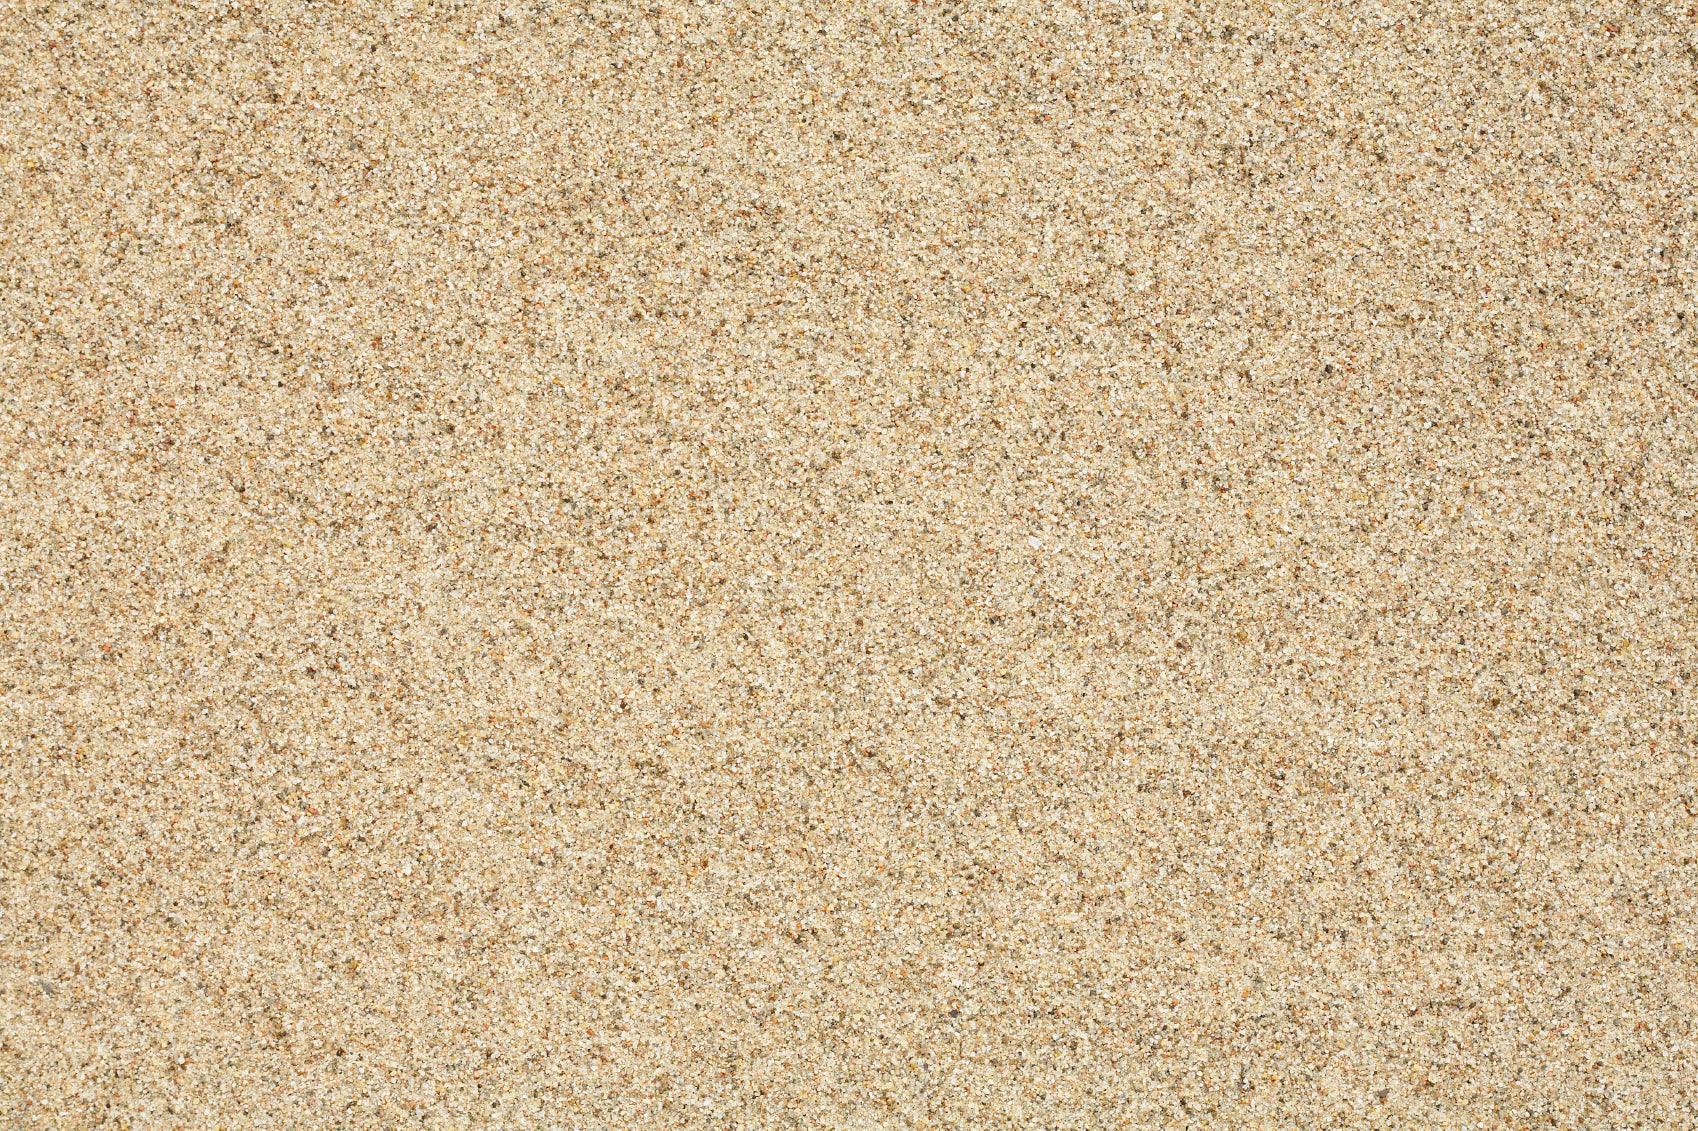 A close-up view of fine, light brown sand grains, uniformly spread across the image. The texture appears soft and slightly speckled, with a natural, earthy tone. Ideal for golf course bunker sand due to its even surface and superior non-staining property. Brisks Golf Course Bunker Sand is the perfect choice for maintaining your golf course's pristine bunkers.